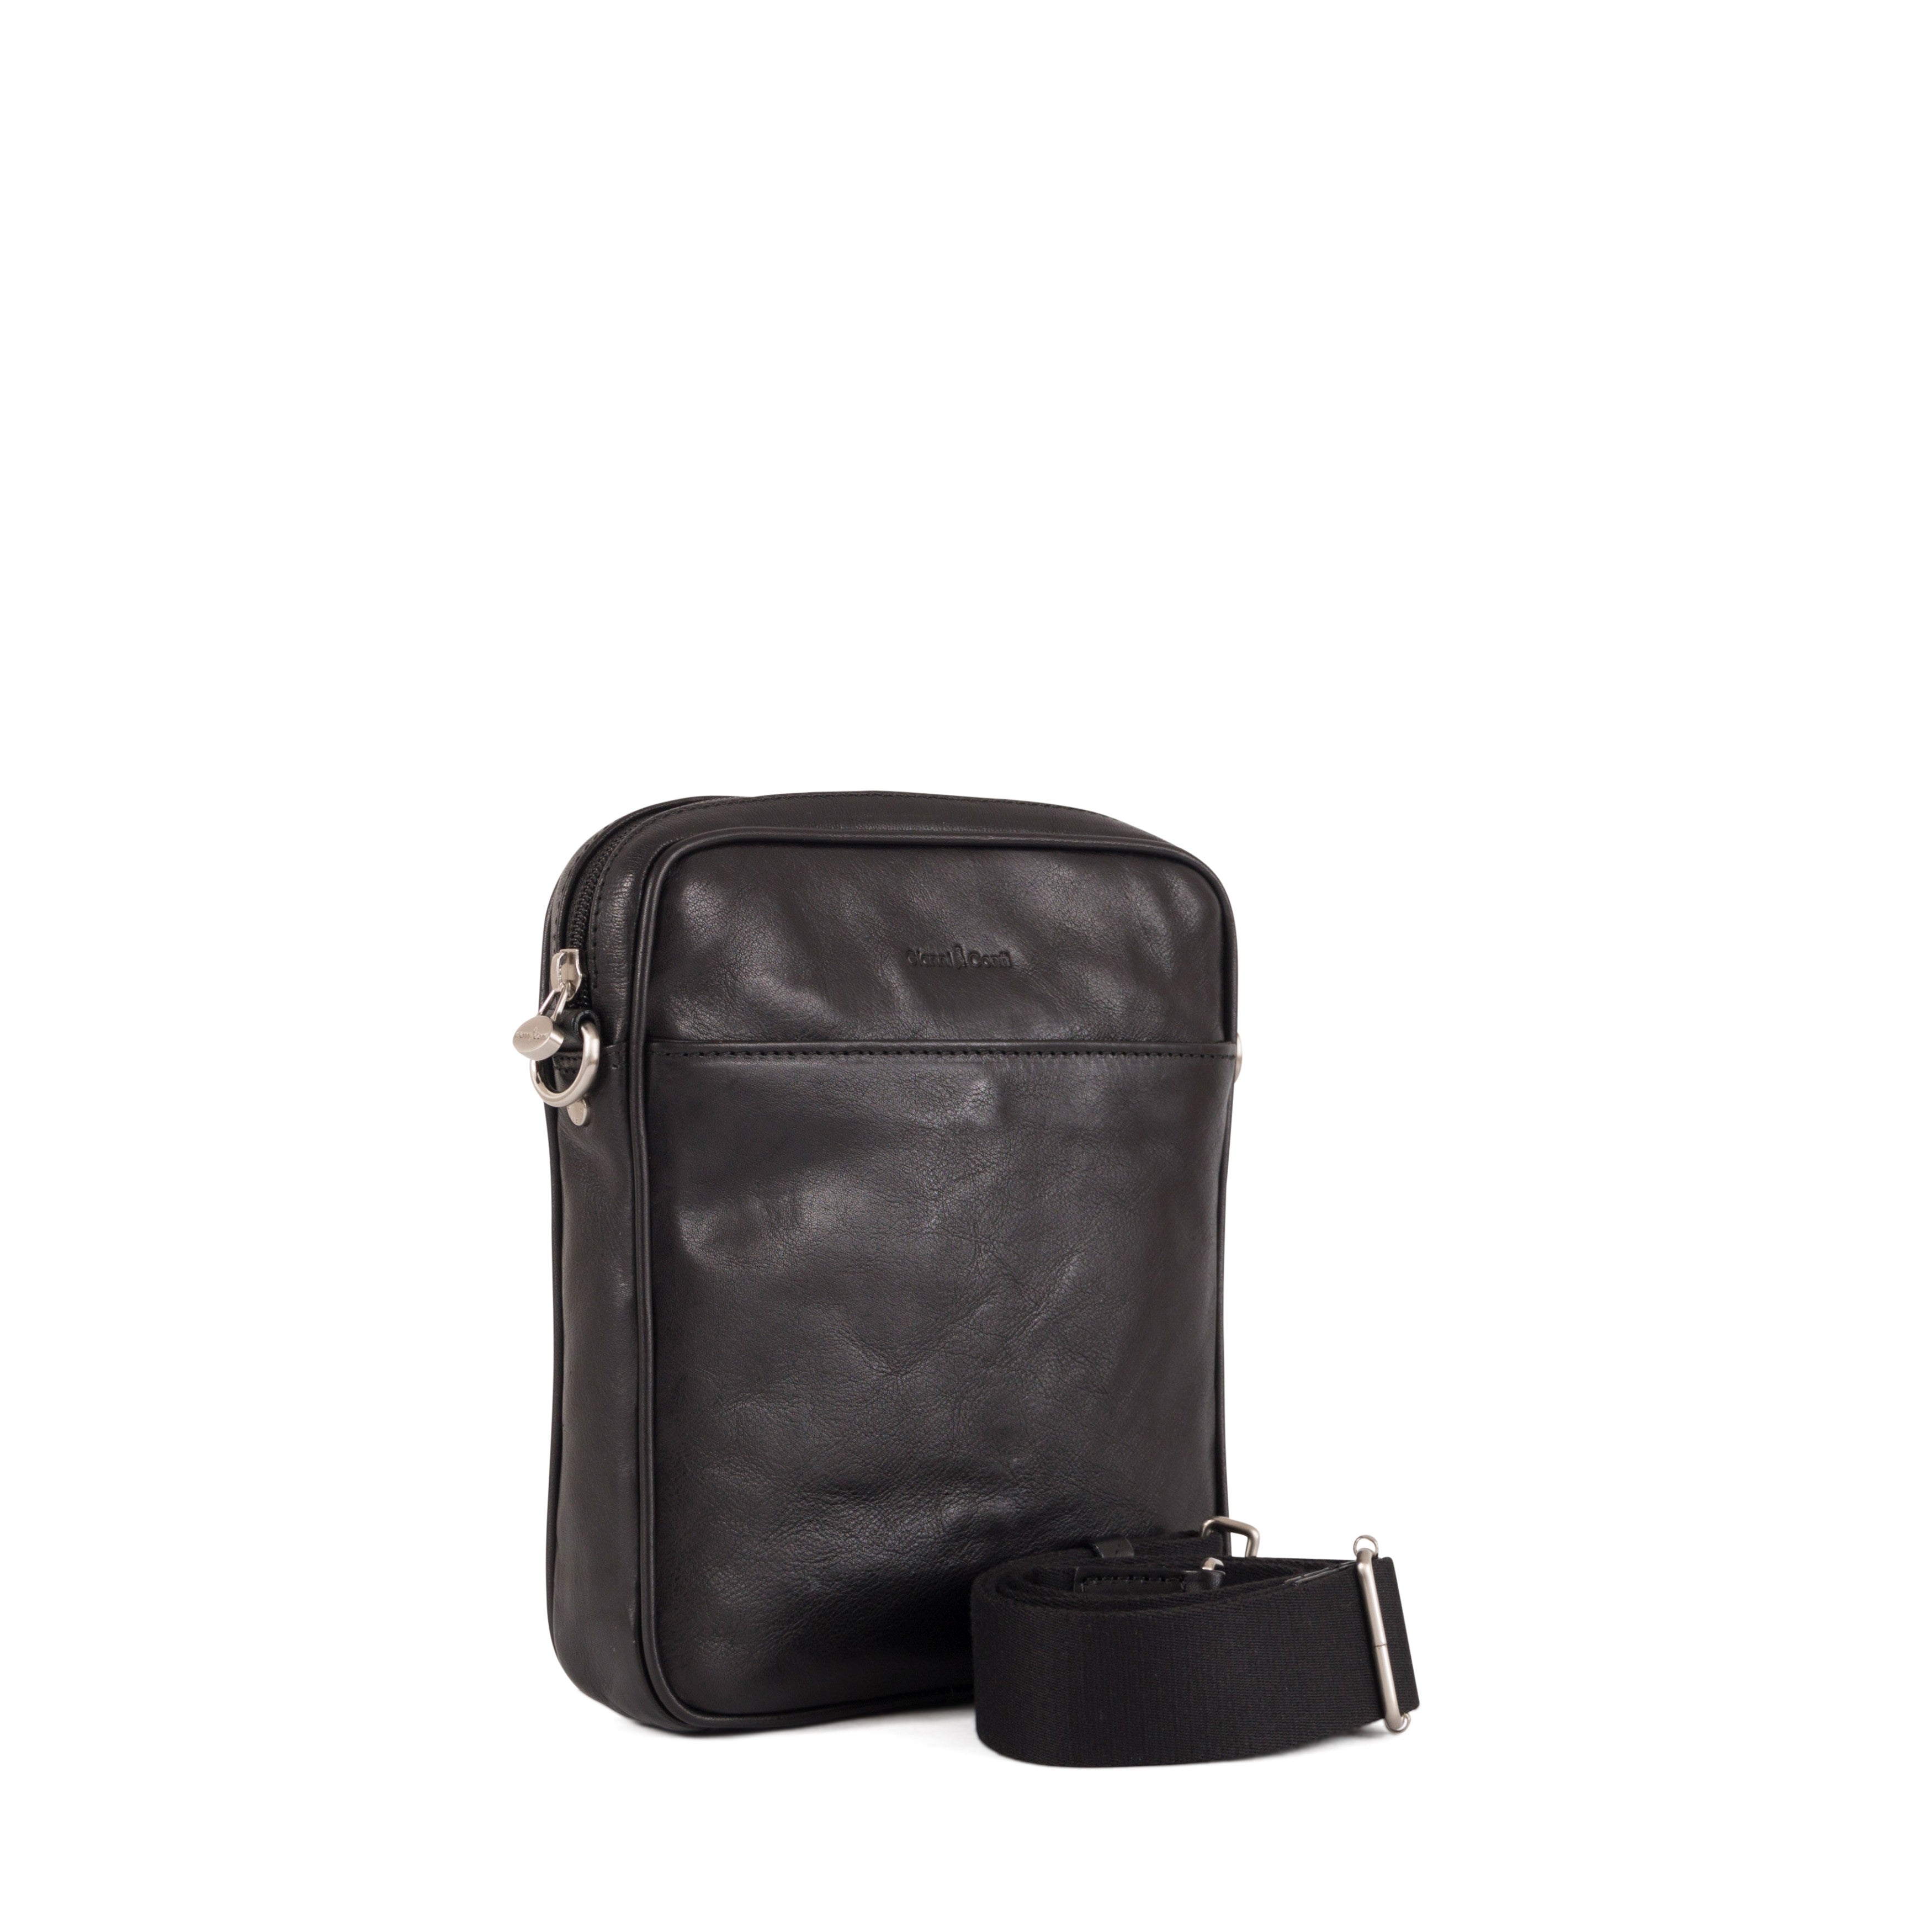 AXEL Crossbody by Gianni Conti - Vegetable-Tanned Leather